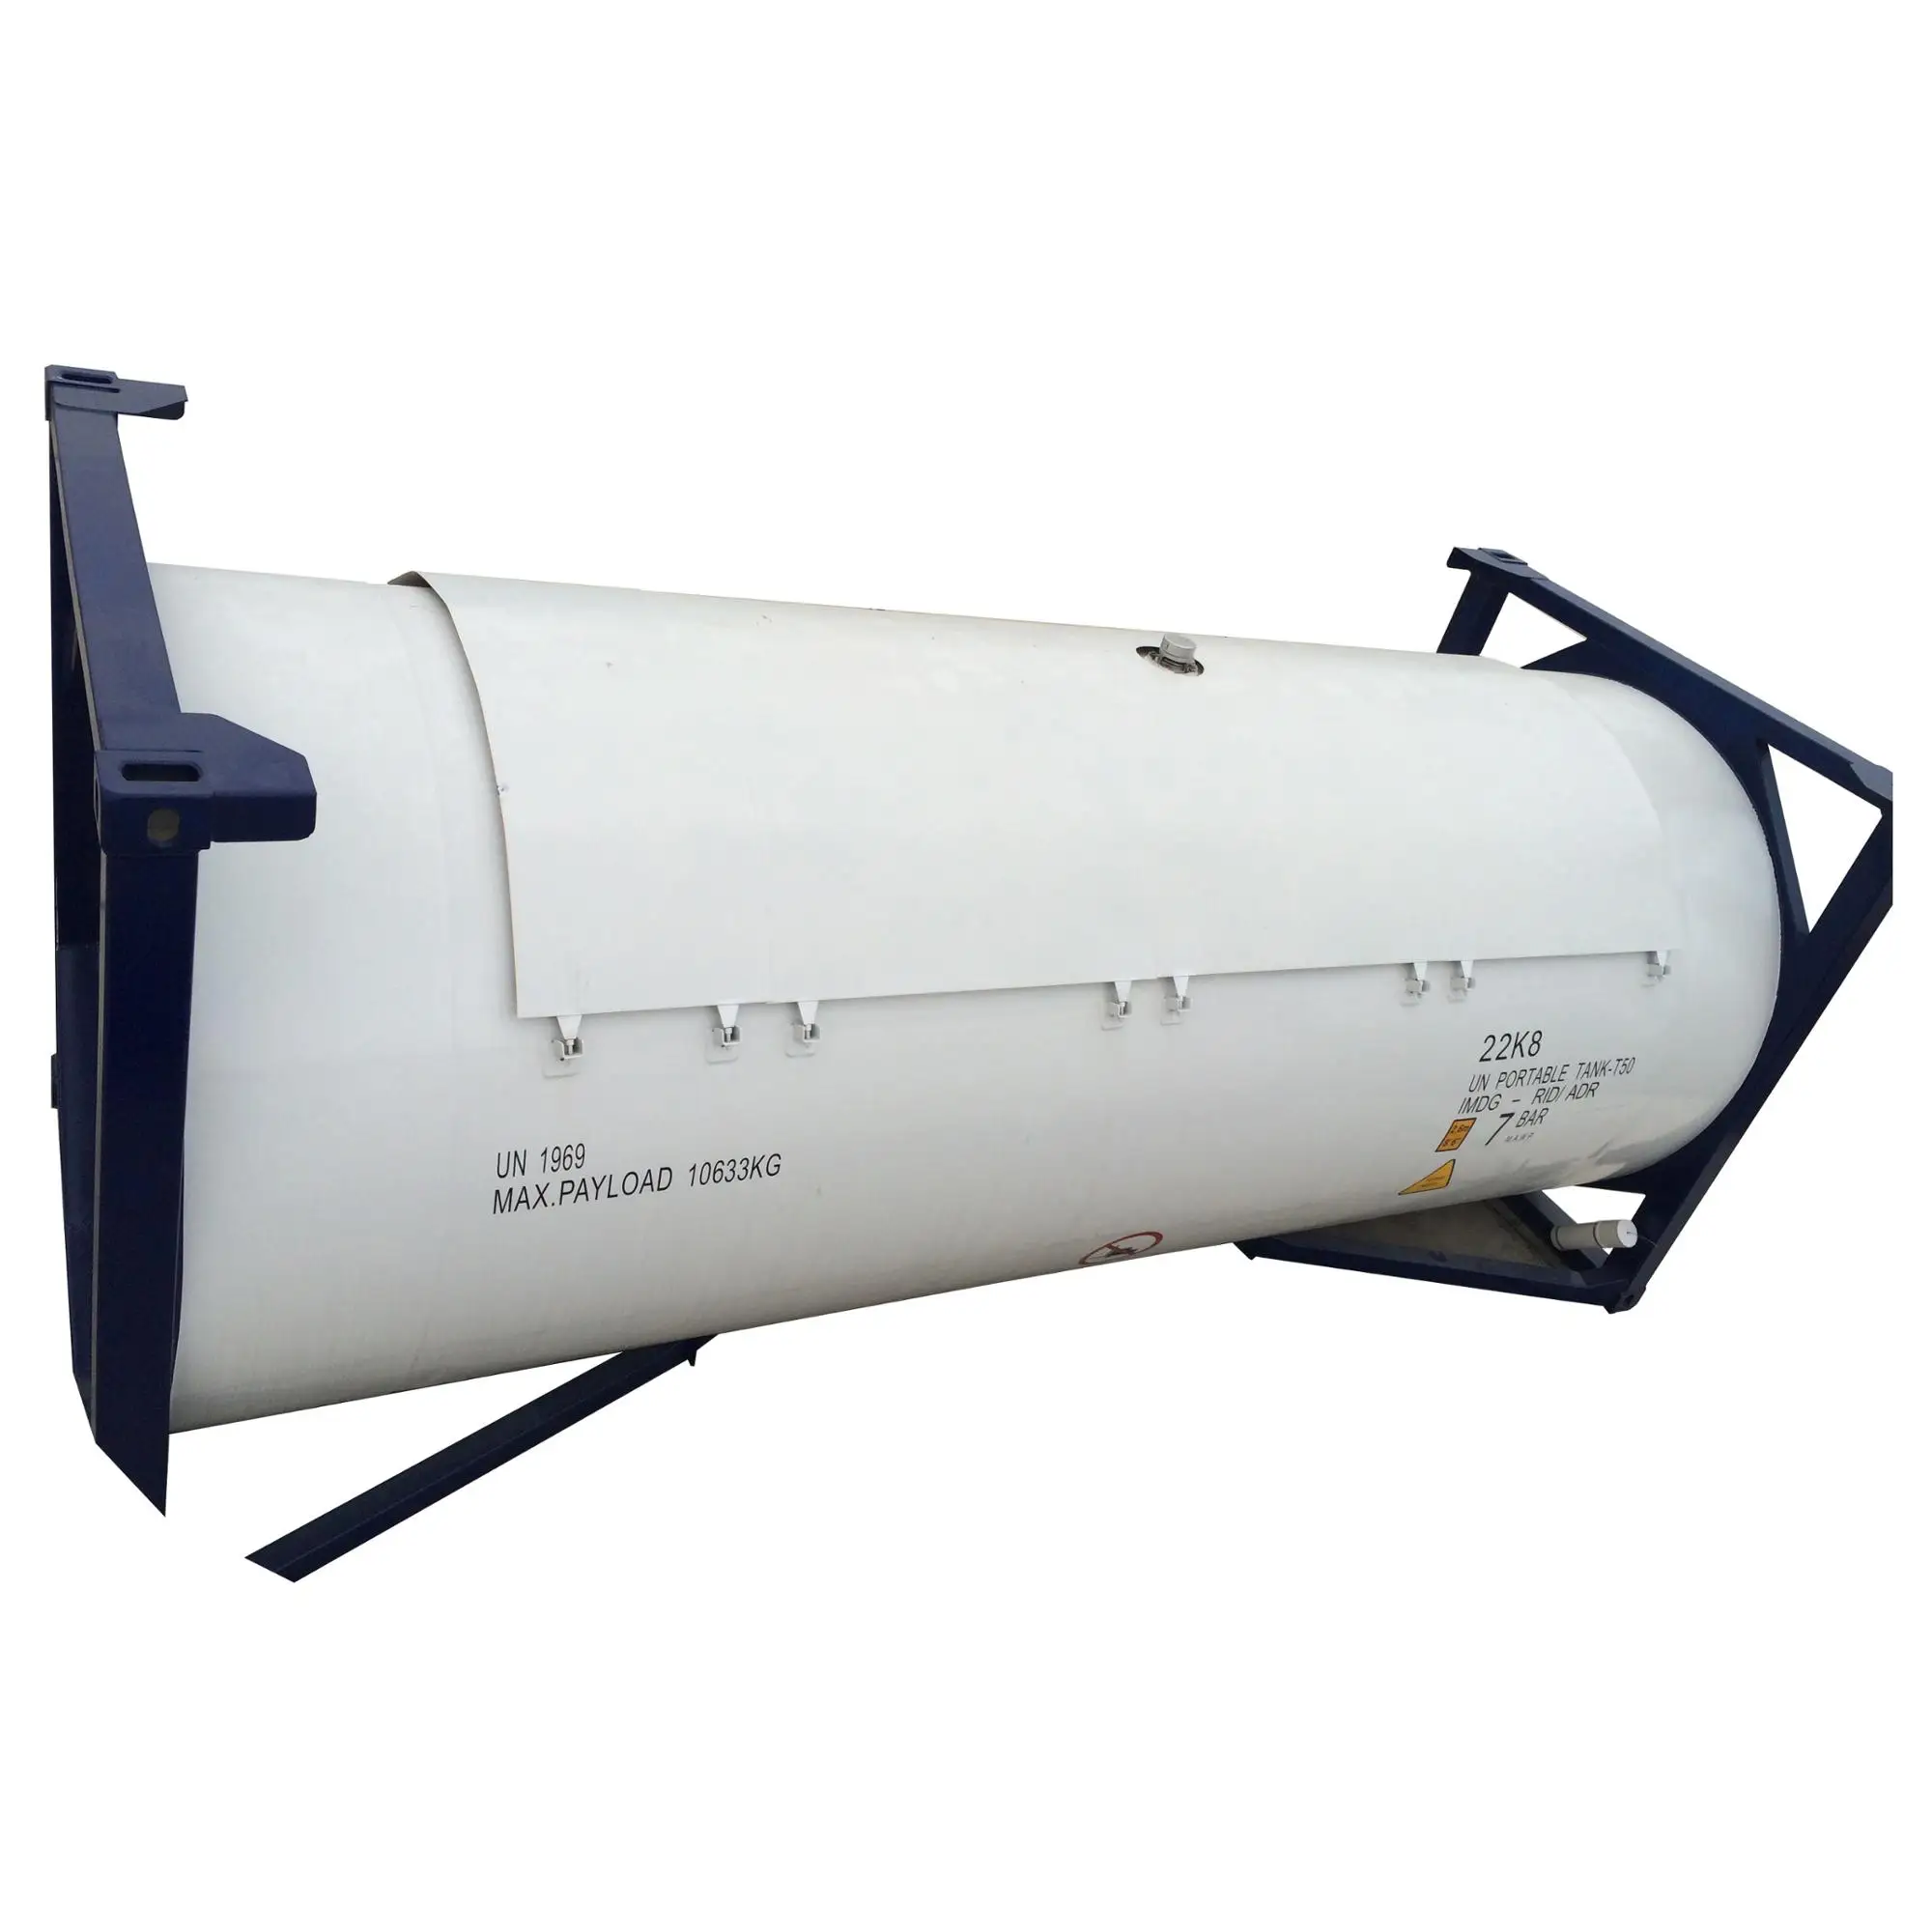 Top safety LPG iso tank 20 ft LPG tank container 20ft for sale in Indonesia